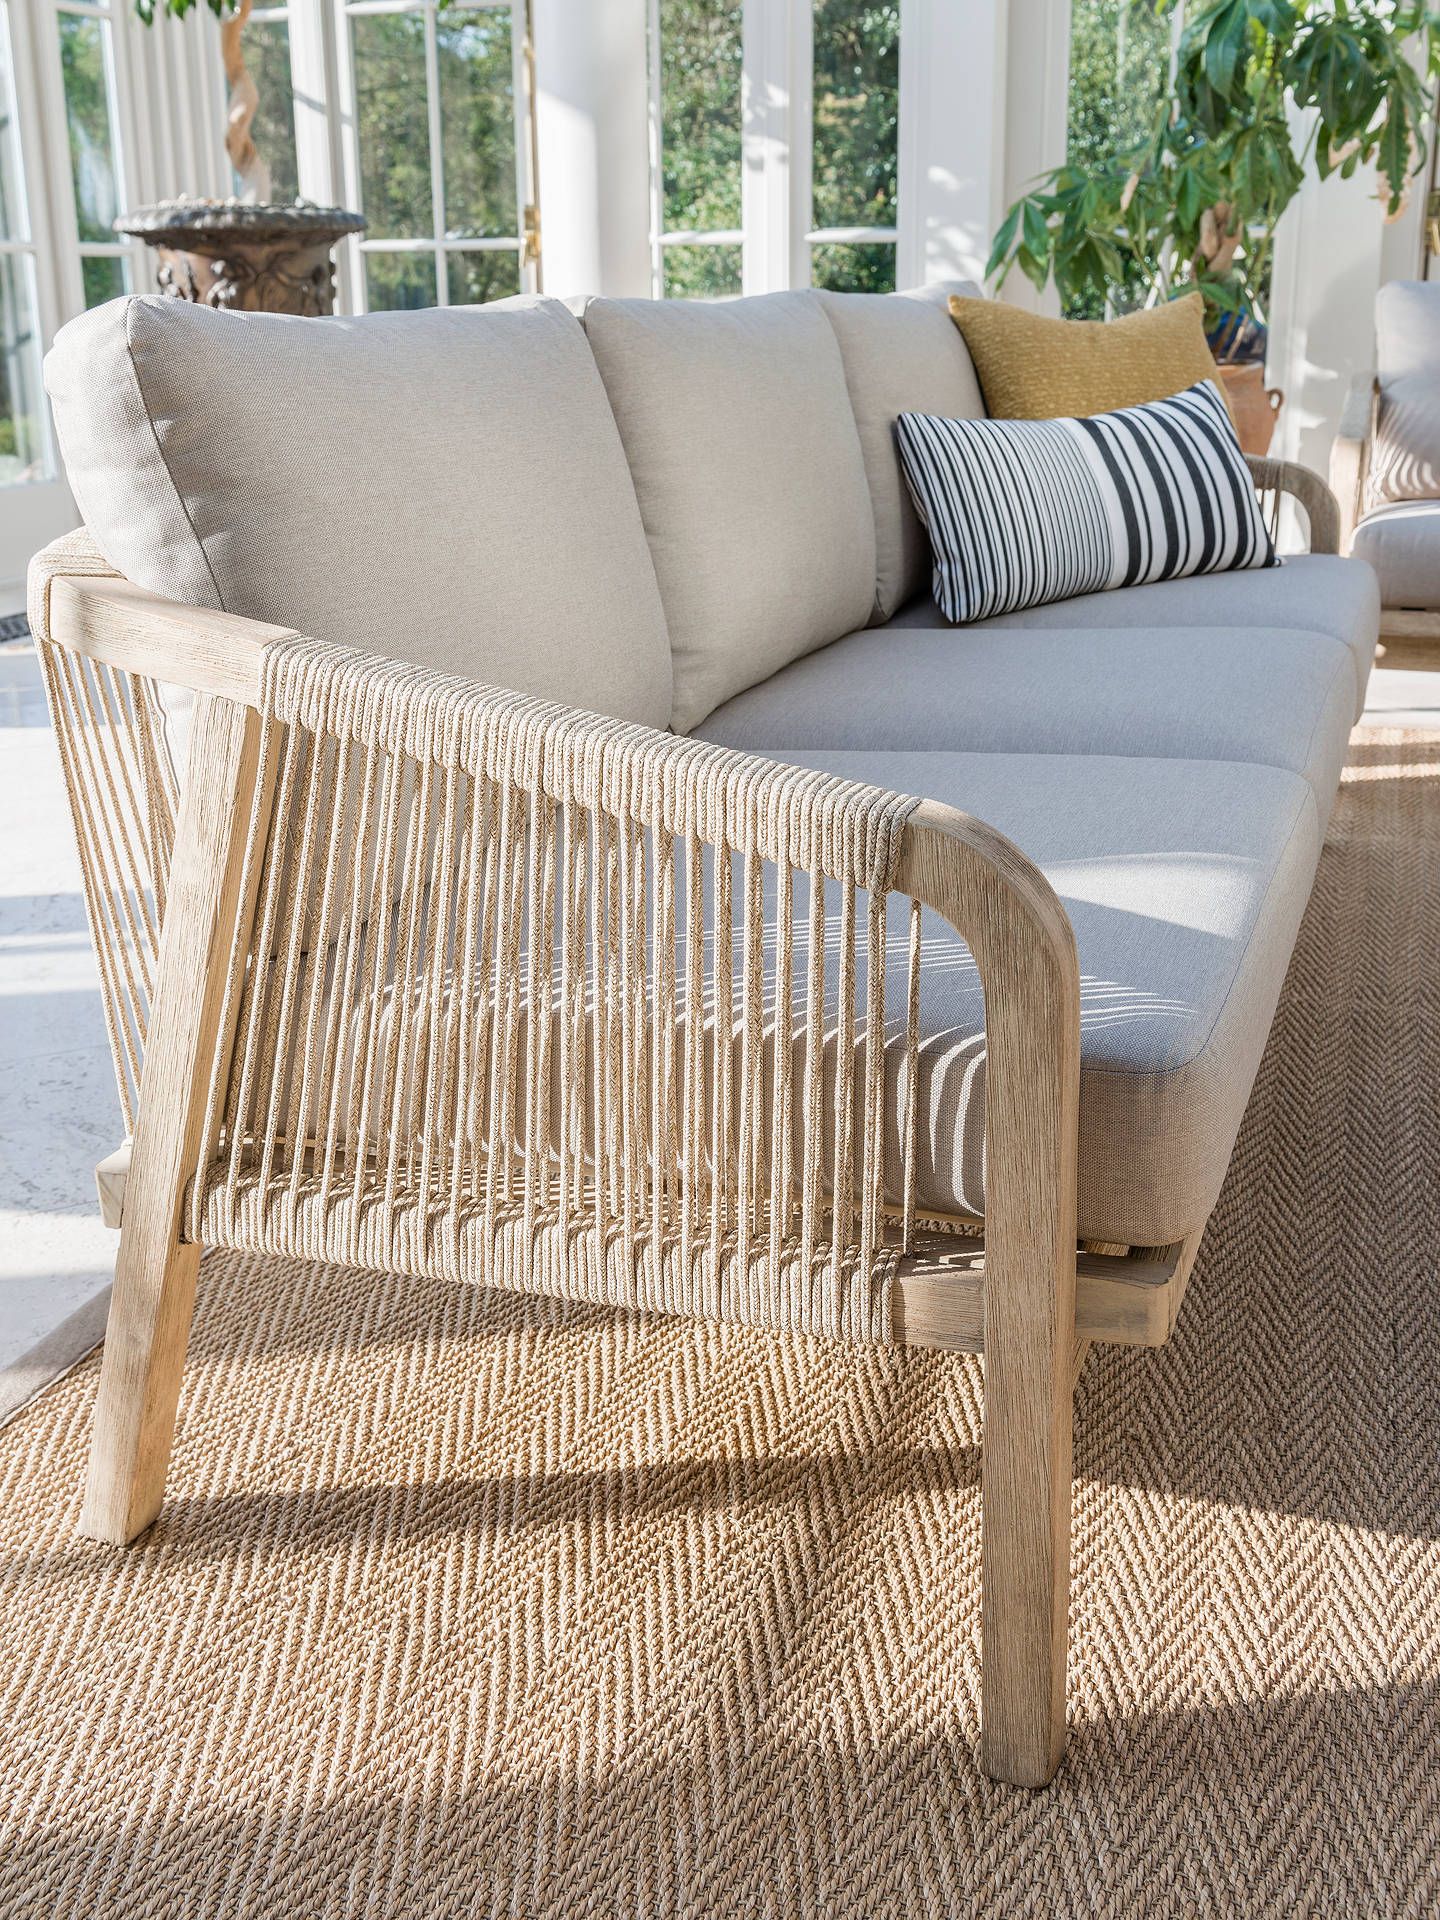 The Ultimate Guide to Garden Furniture for a Luxurious Outdoor Oasis